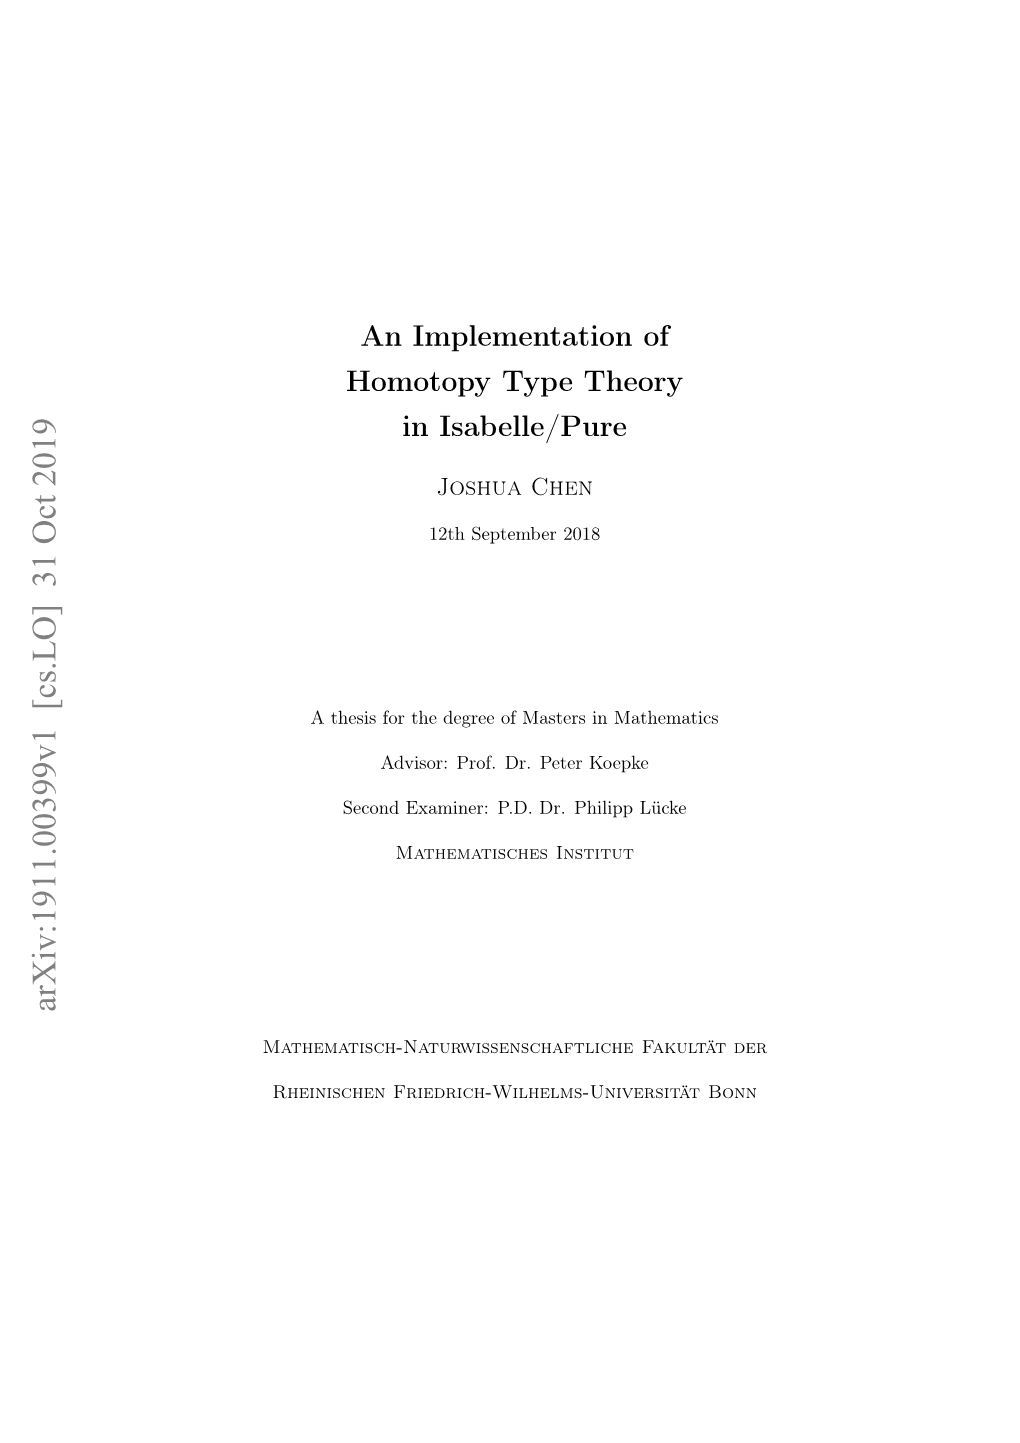 An Implementation of Homotopy Type Theory in Isabelle/Pure